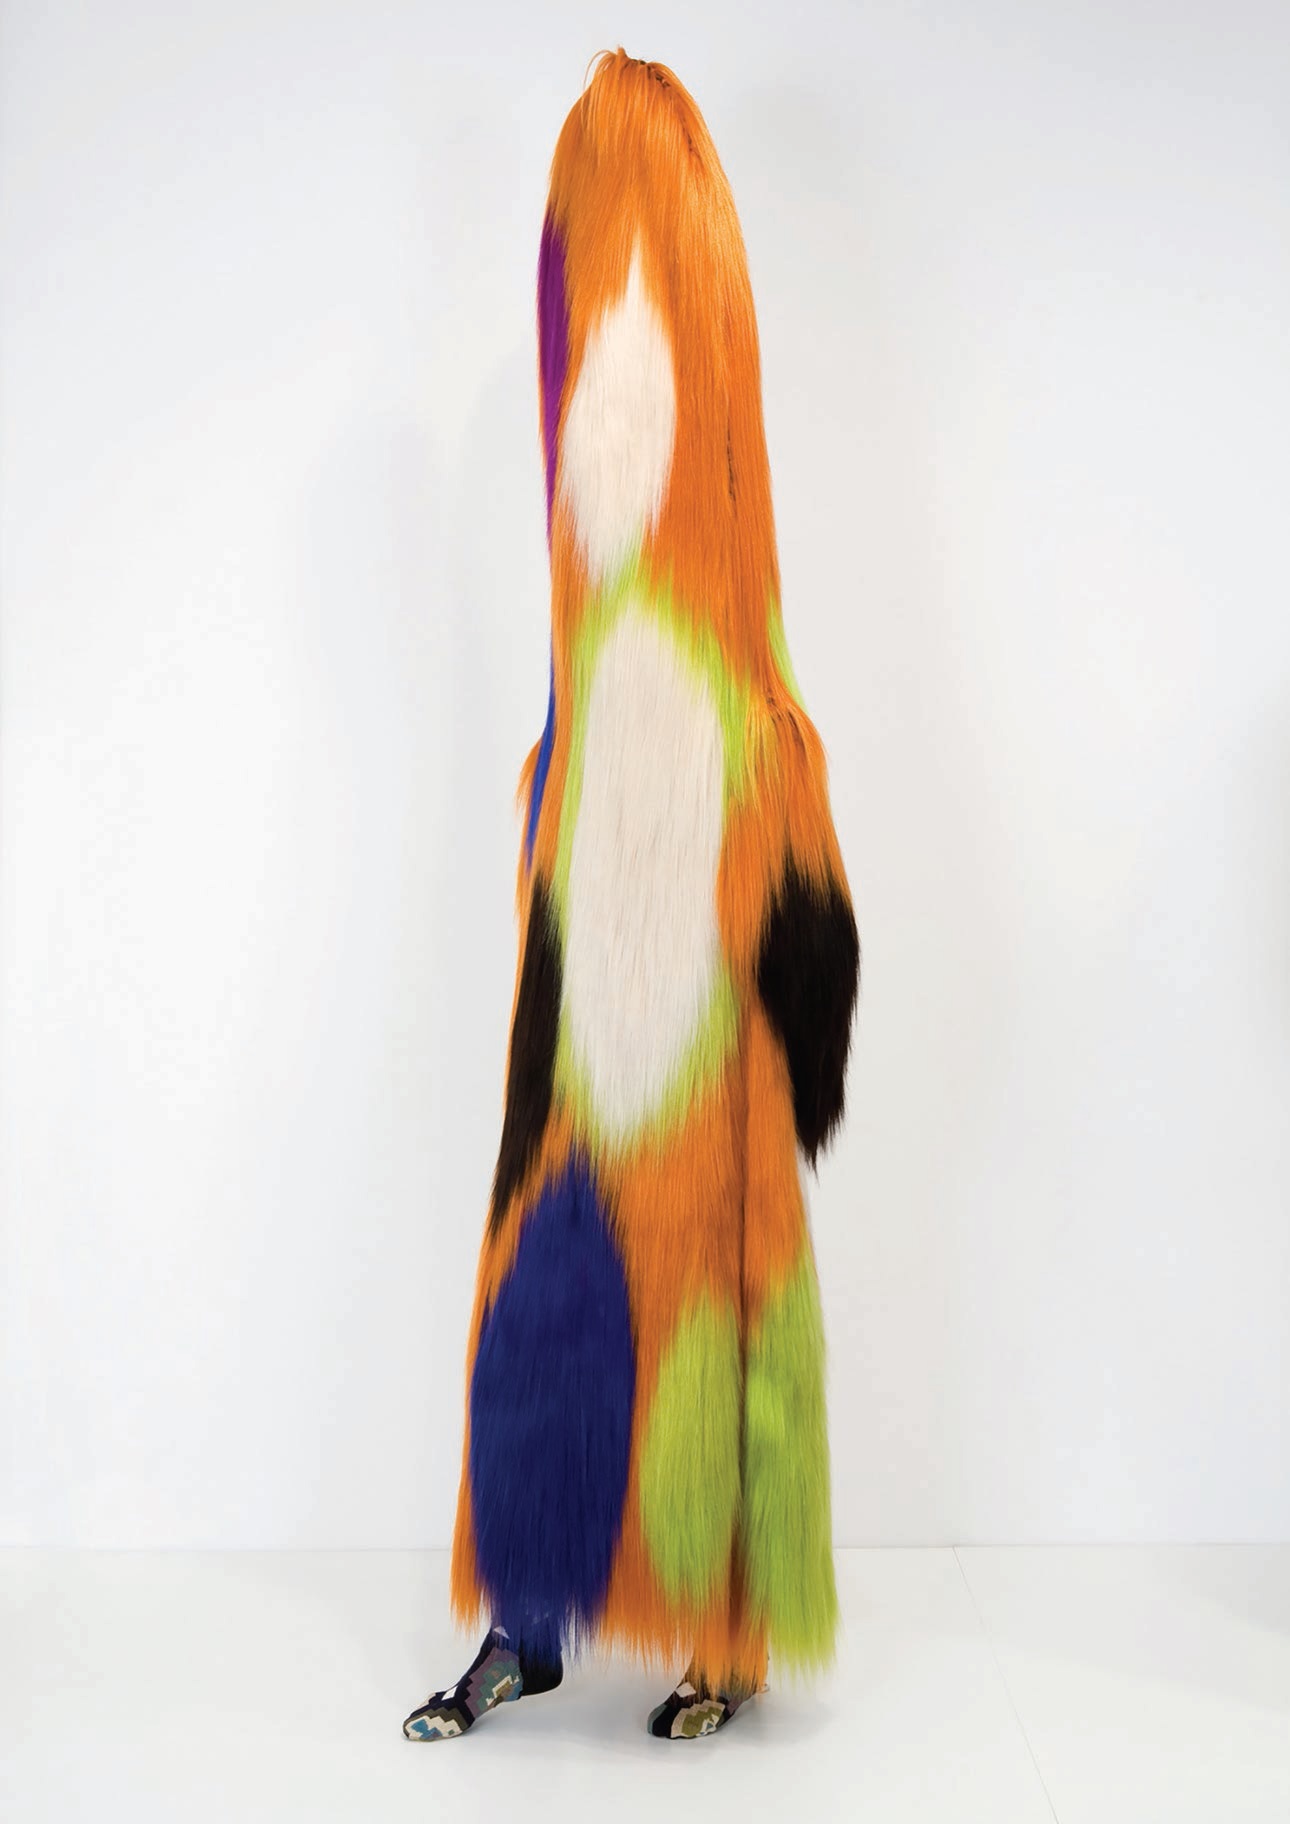 “Soundsuit” (2010, mixed media), 97 inches by 48 inches by 42 inches PHOTO COURTESY OF THE ARTIST AND JACK SHAINMAN GALLERY, NEW YORK